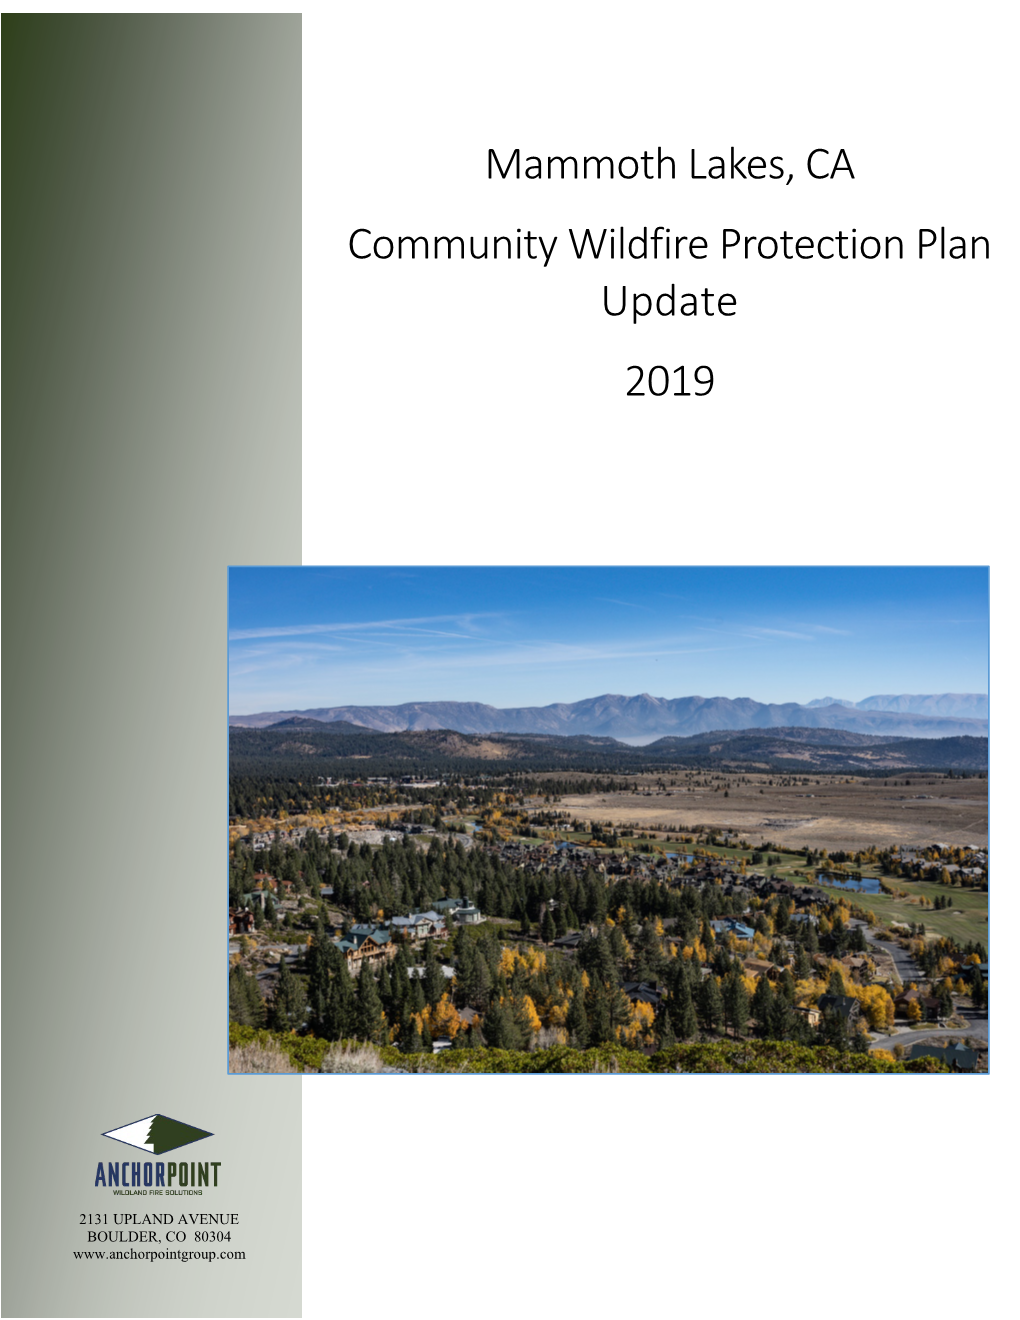 Mammoth Lakes, CA Community Wildfire Protection Plan Update 2019